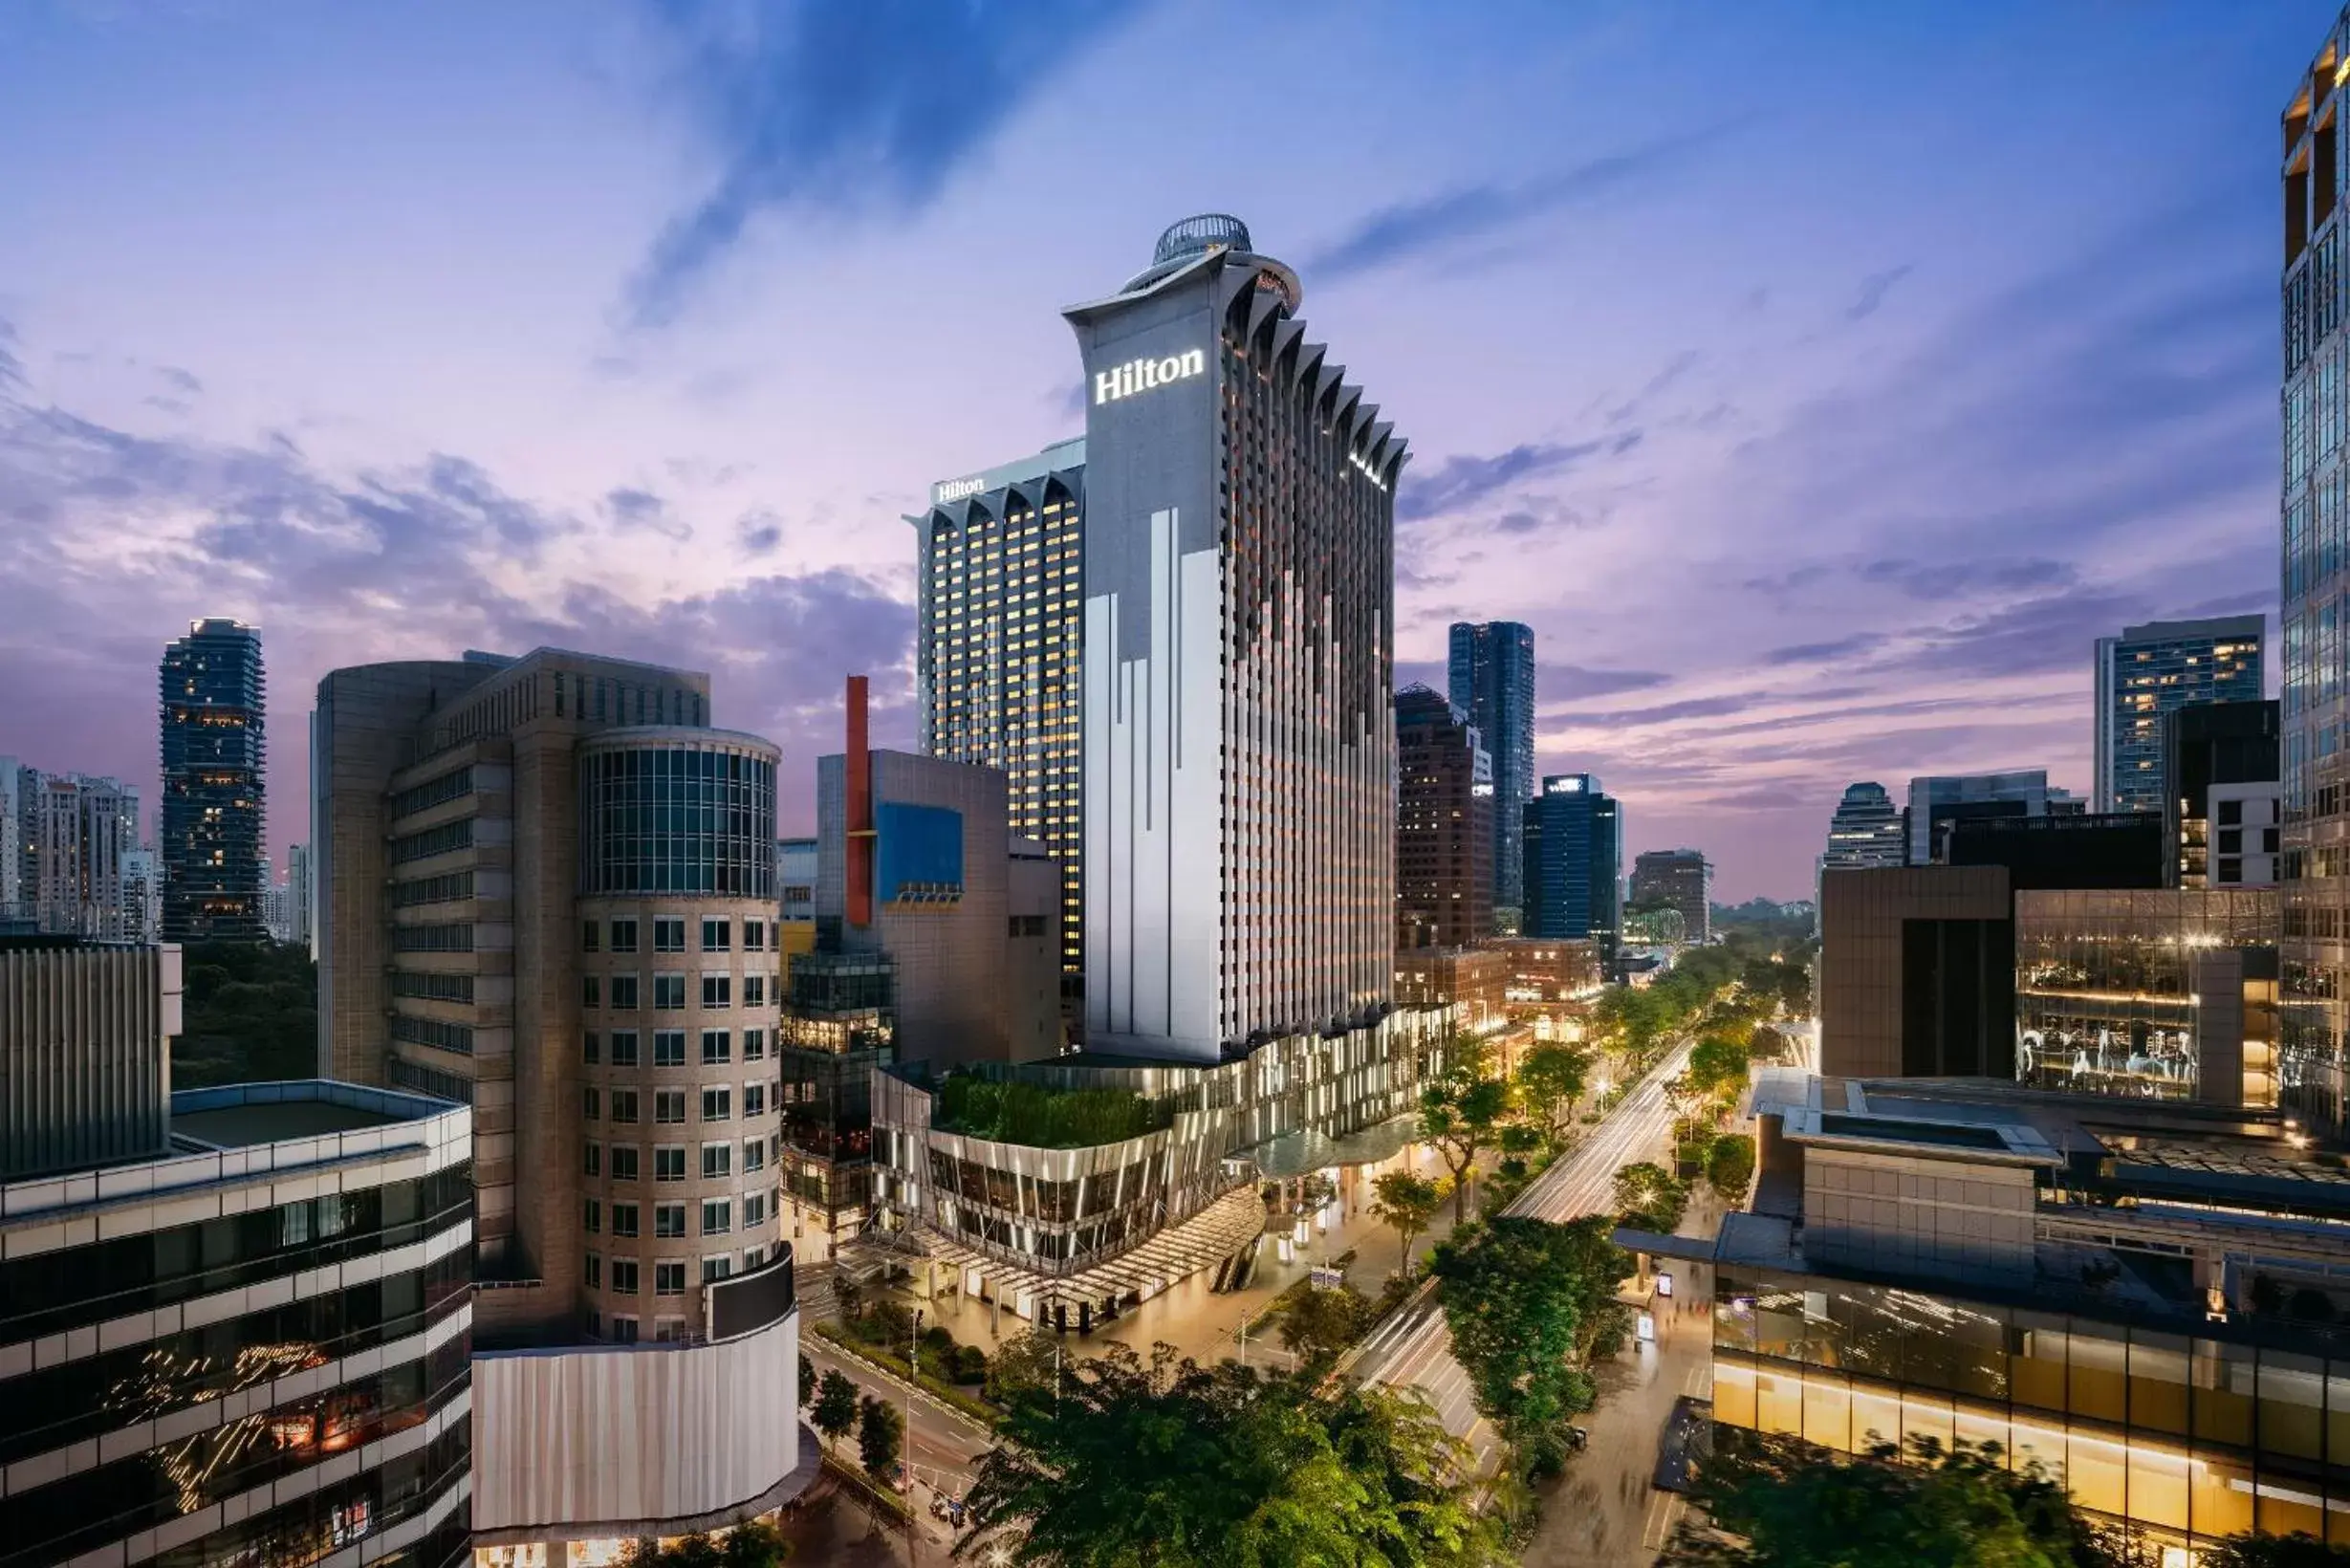 Property building in Hilton Singapore Orchard